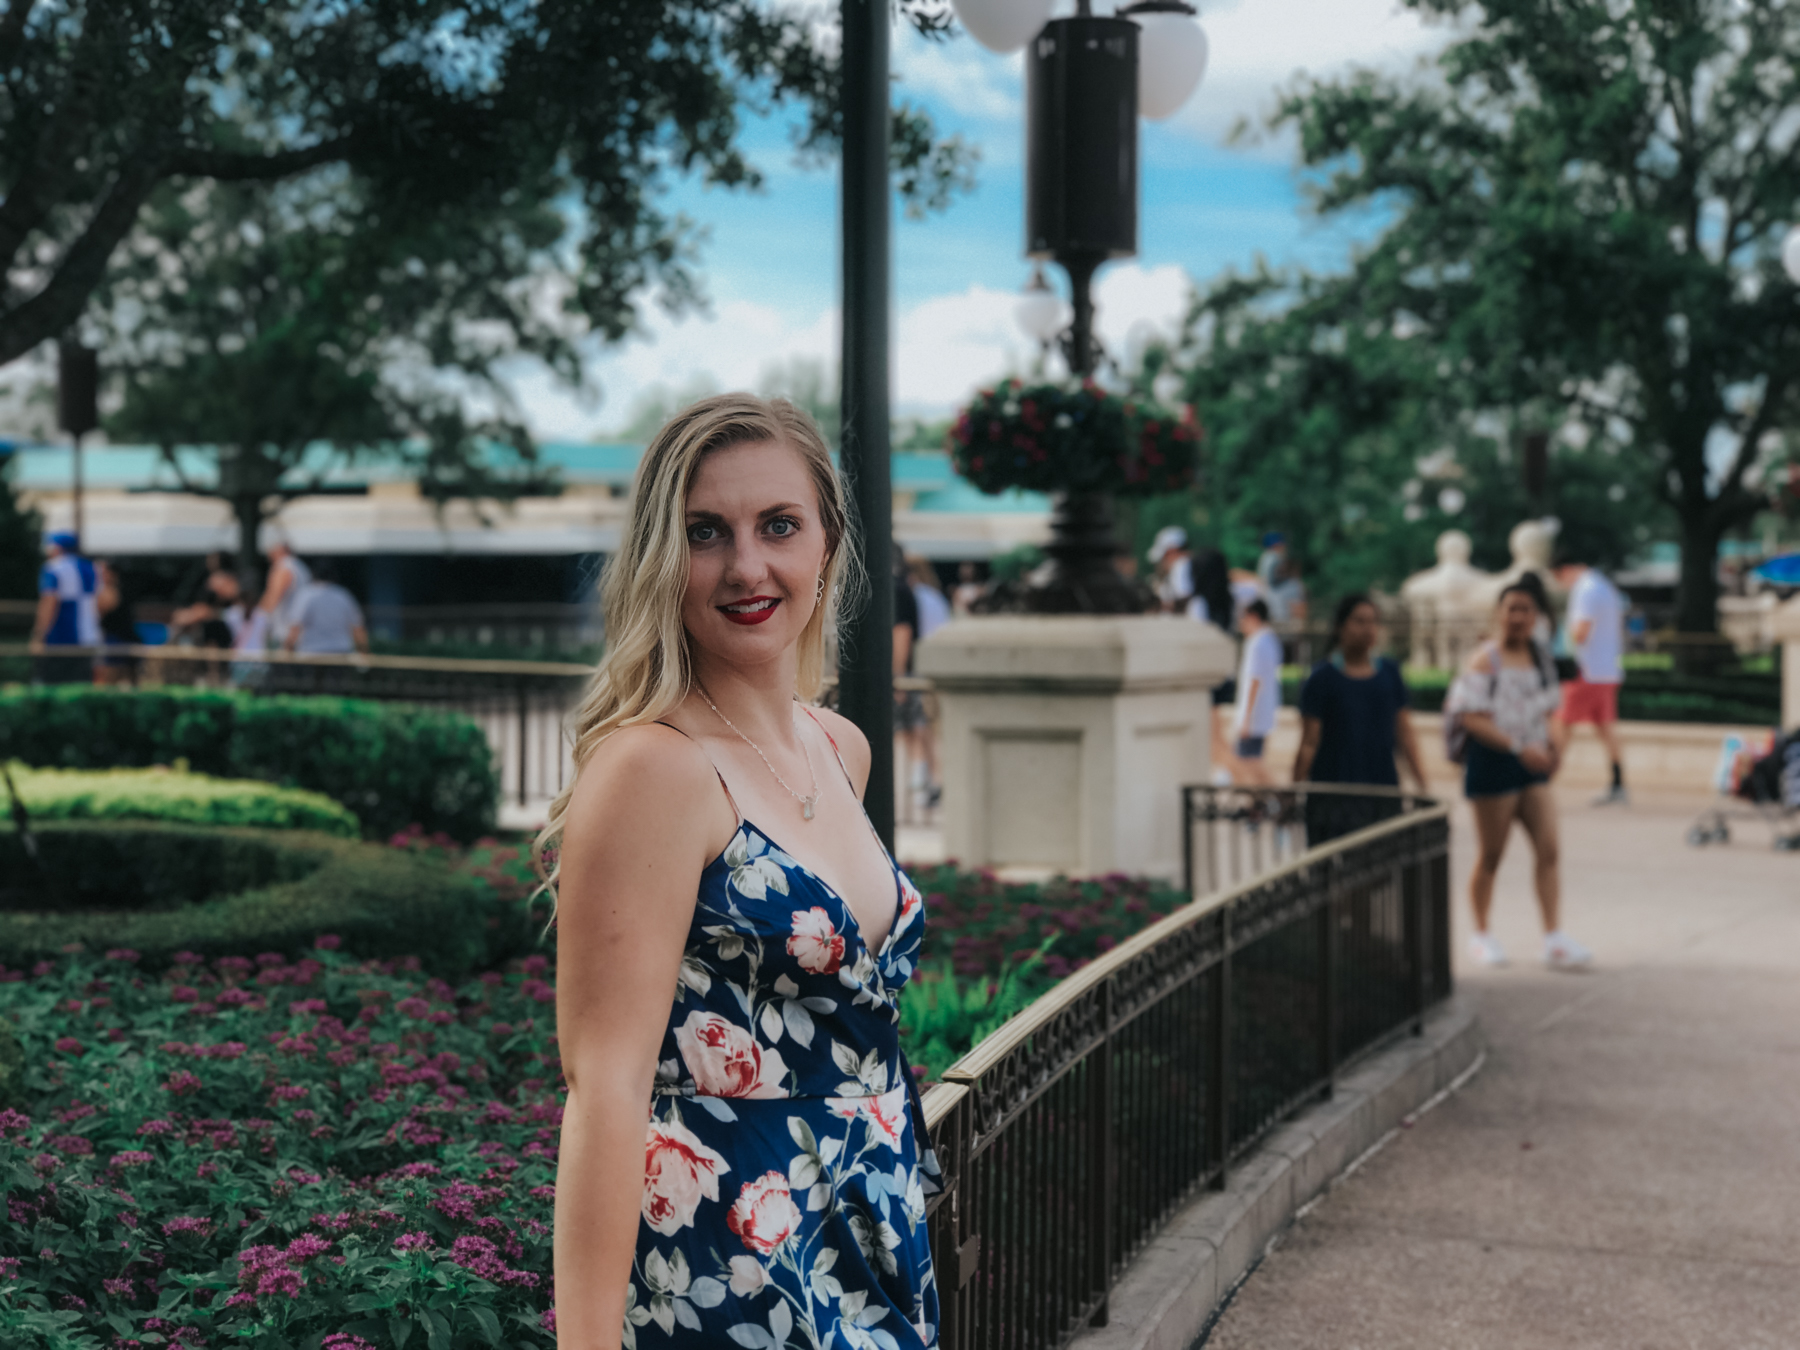 The floral maxi dress I wore to Magic Kingdom on our Disney Vacation